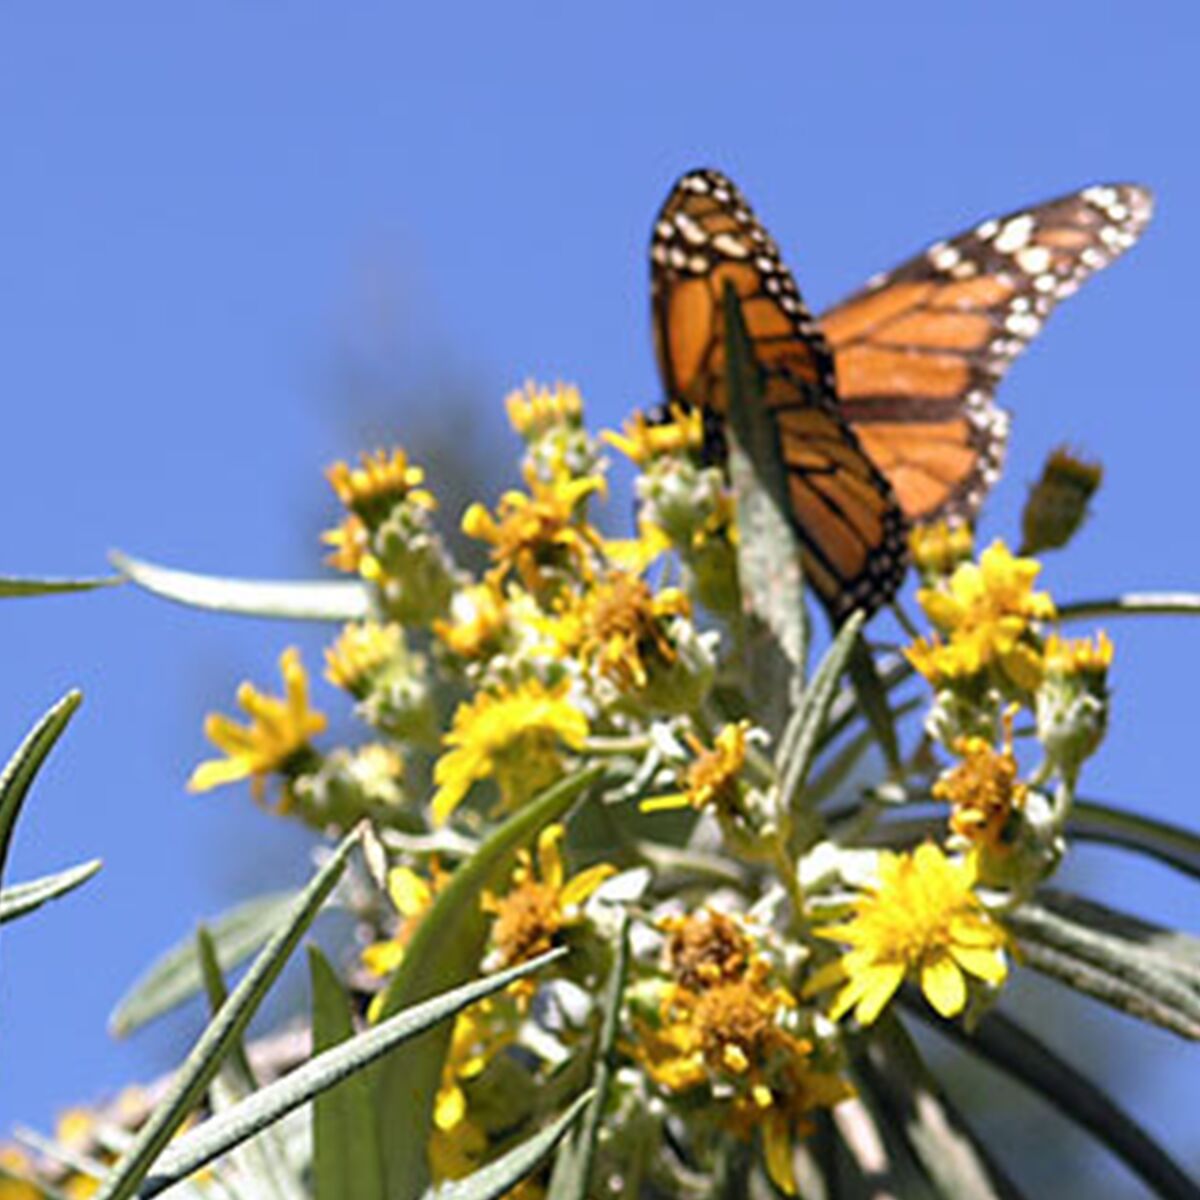 A monarch butterfly sits on yellow flowers.